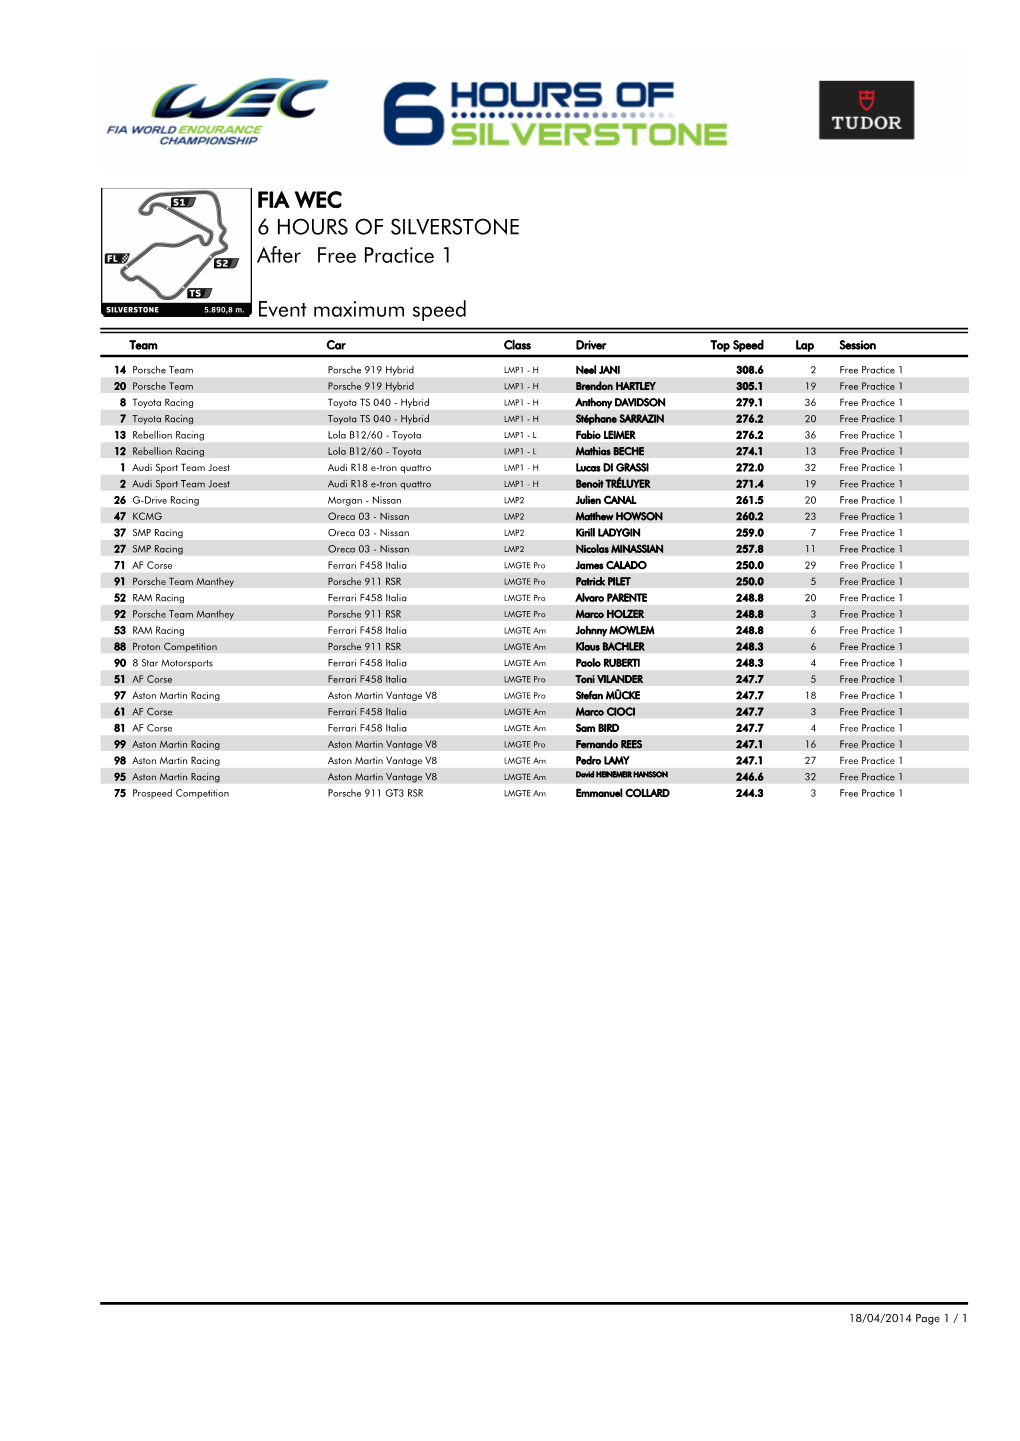 Event Maximum Speed Free Practice 1 6 HOURS of SILVERSTONE FIA